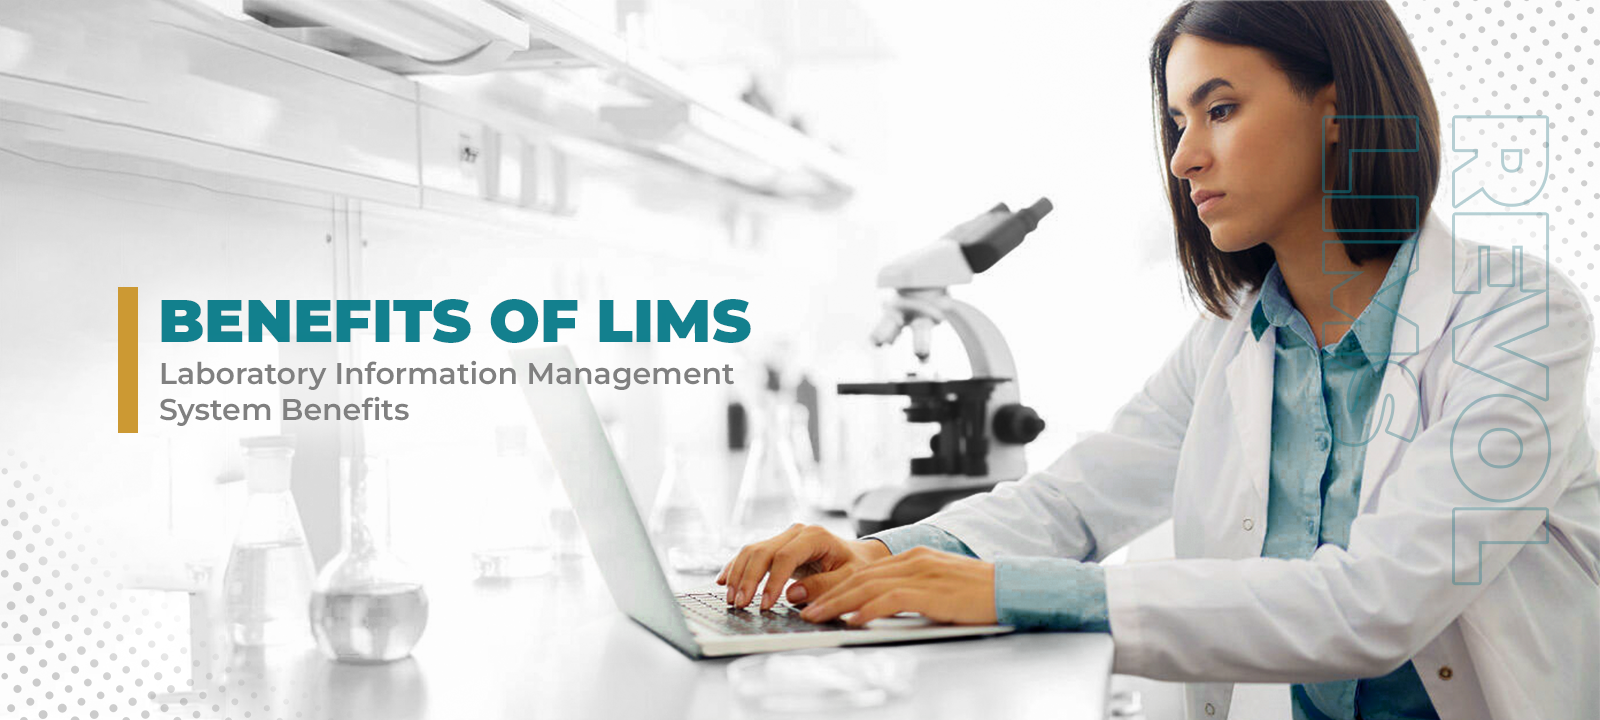 An image illustrating the benefits of Revol Laboratory Information Management System (LIMS).